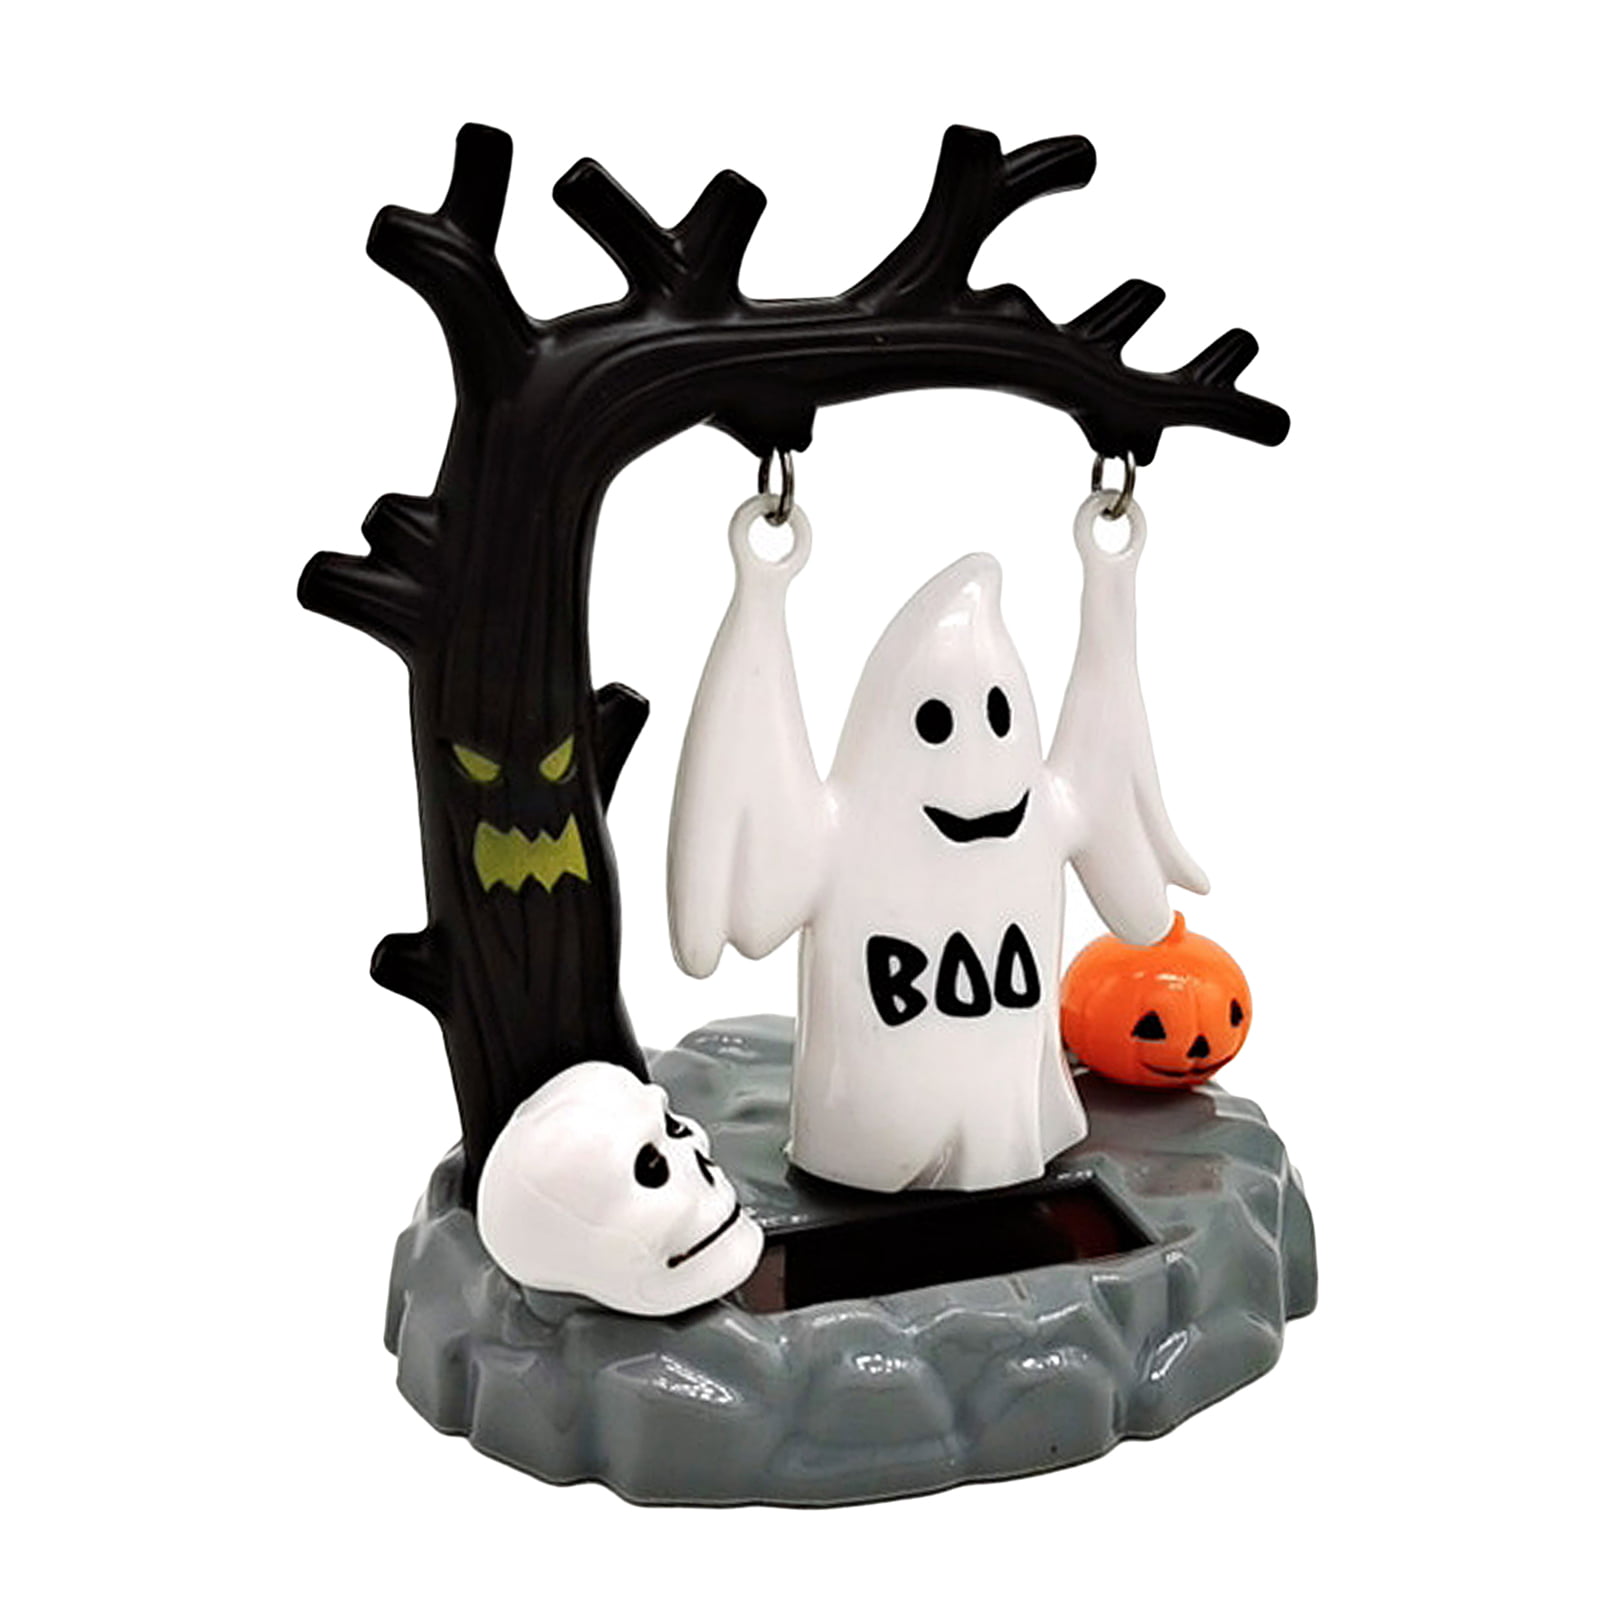 New Solar Powered Dancing Toy Bobble Head Swinging Ghost 